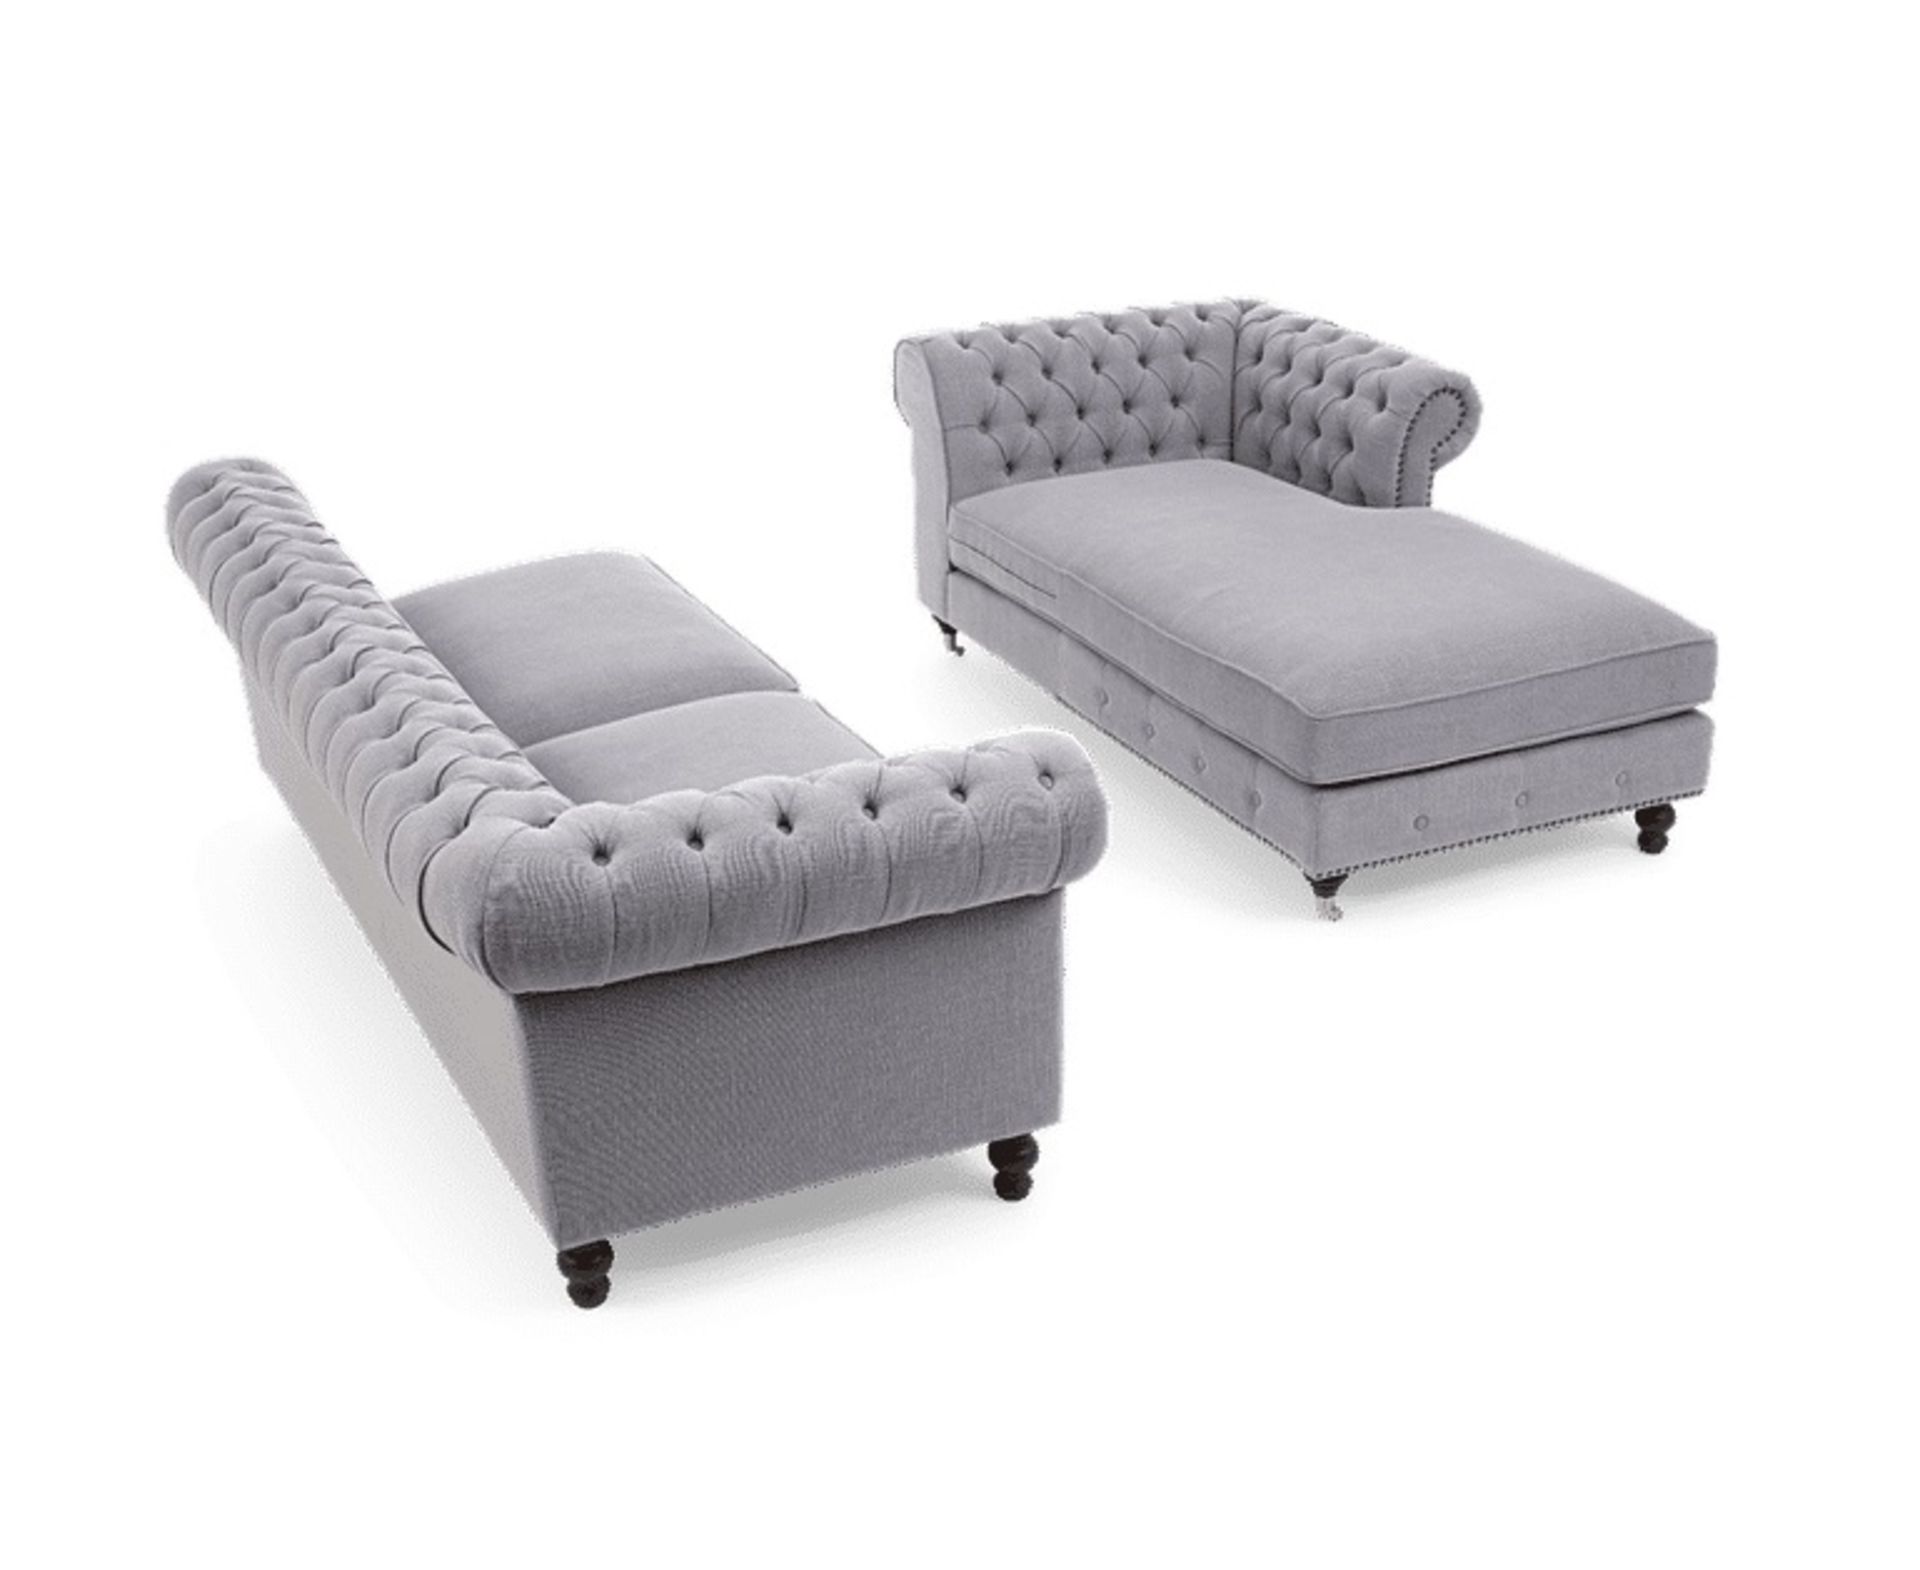 Flora Grey Linen Right Facing Chesterfield Corner Chaise Sofa Comfort, Luxury, Style And Elegance - Image 2 of 2